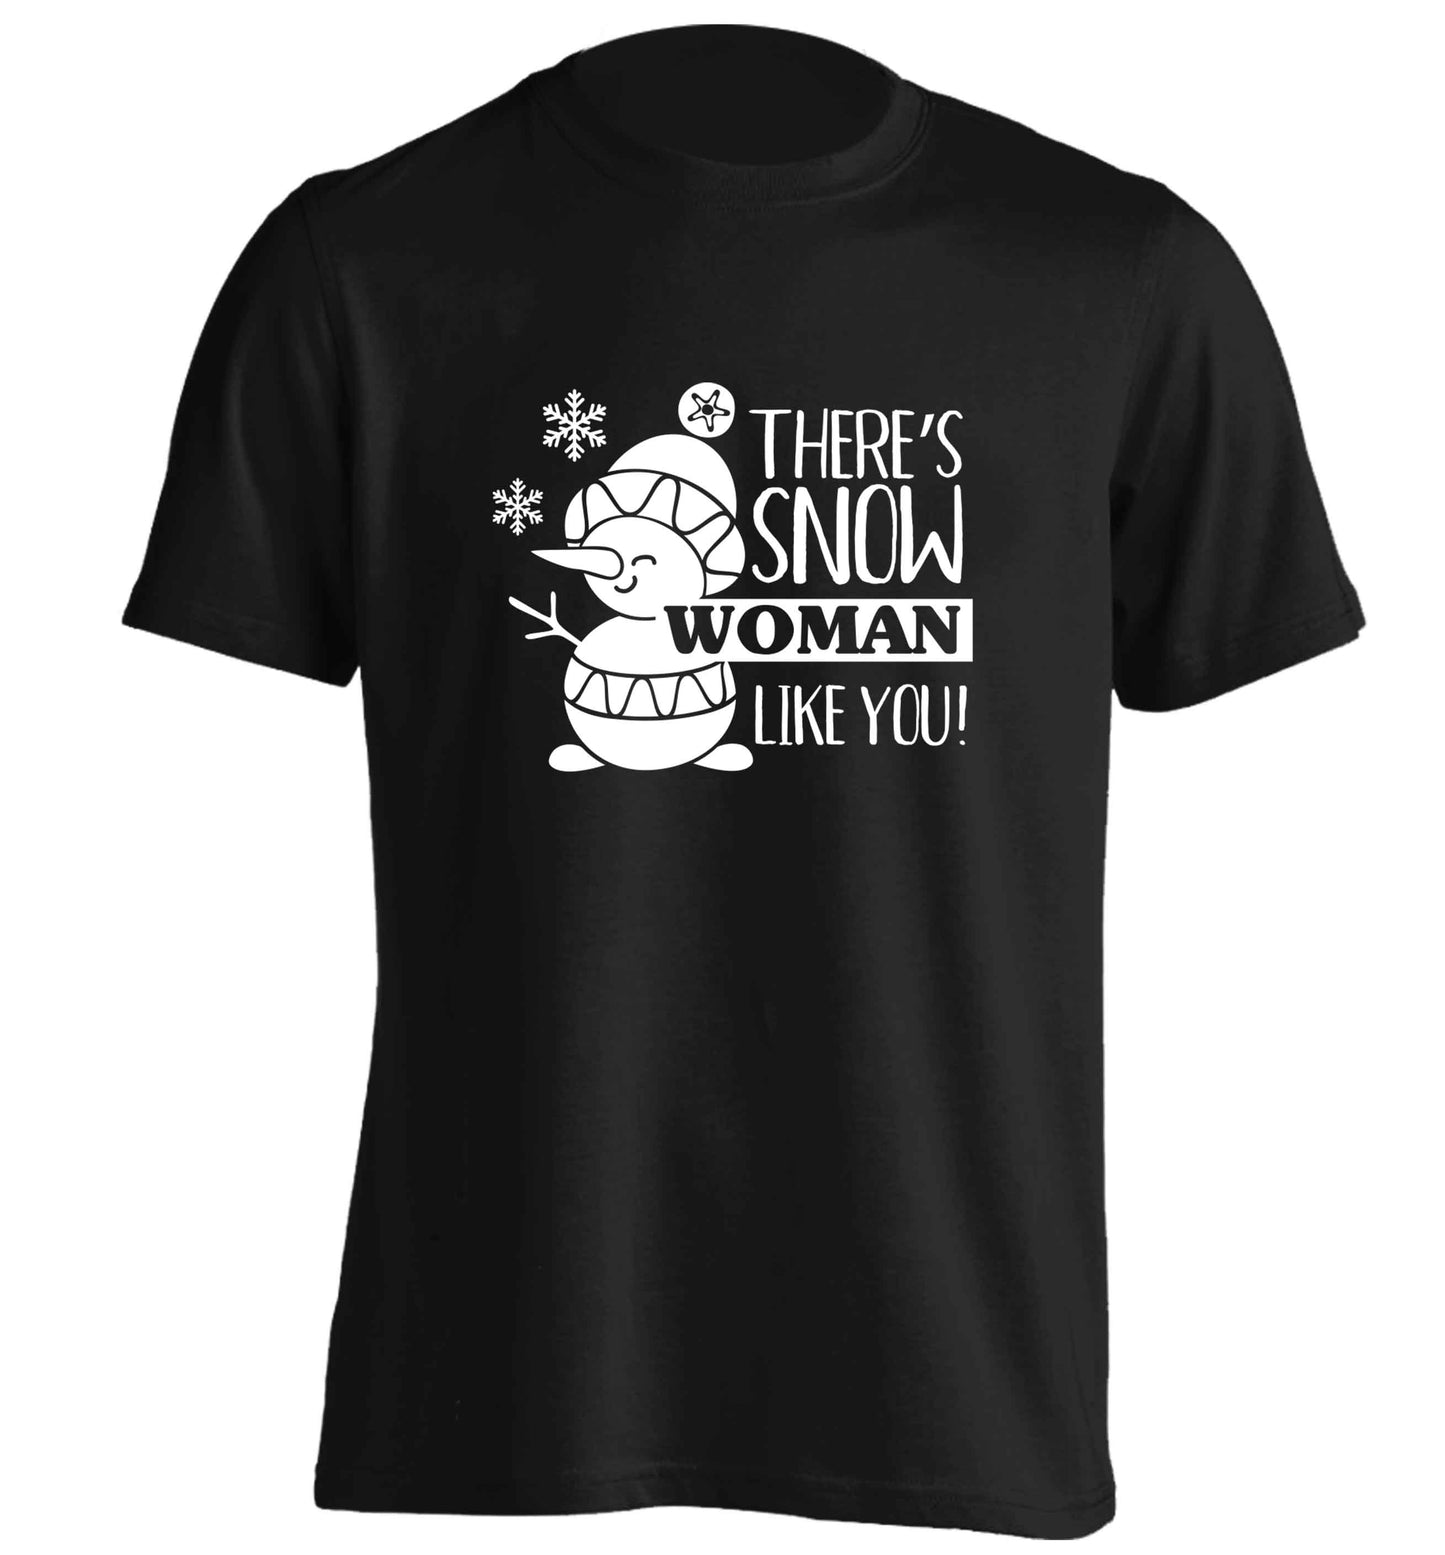 There's snow woman like you adults unisex black Tshirt 2XL